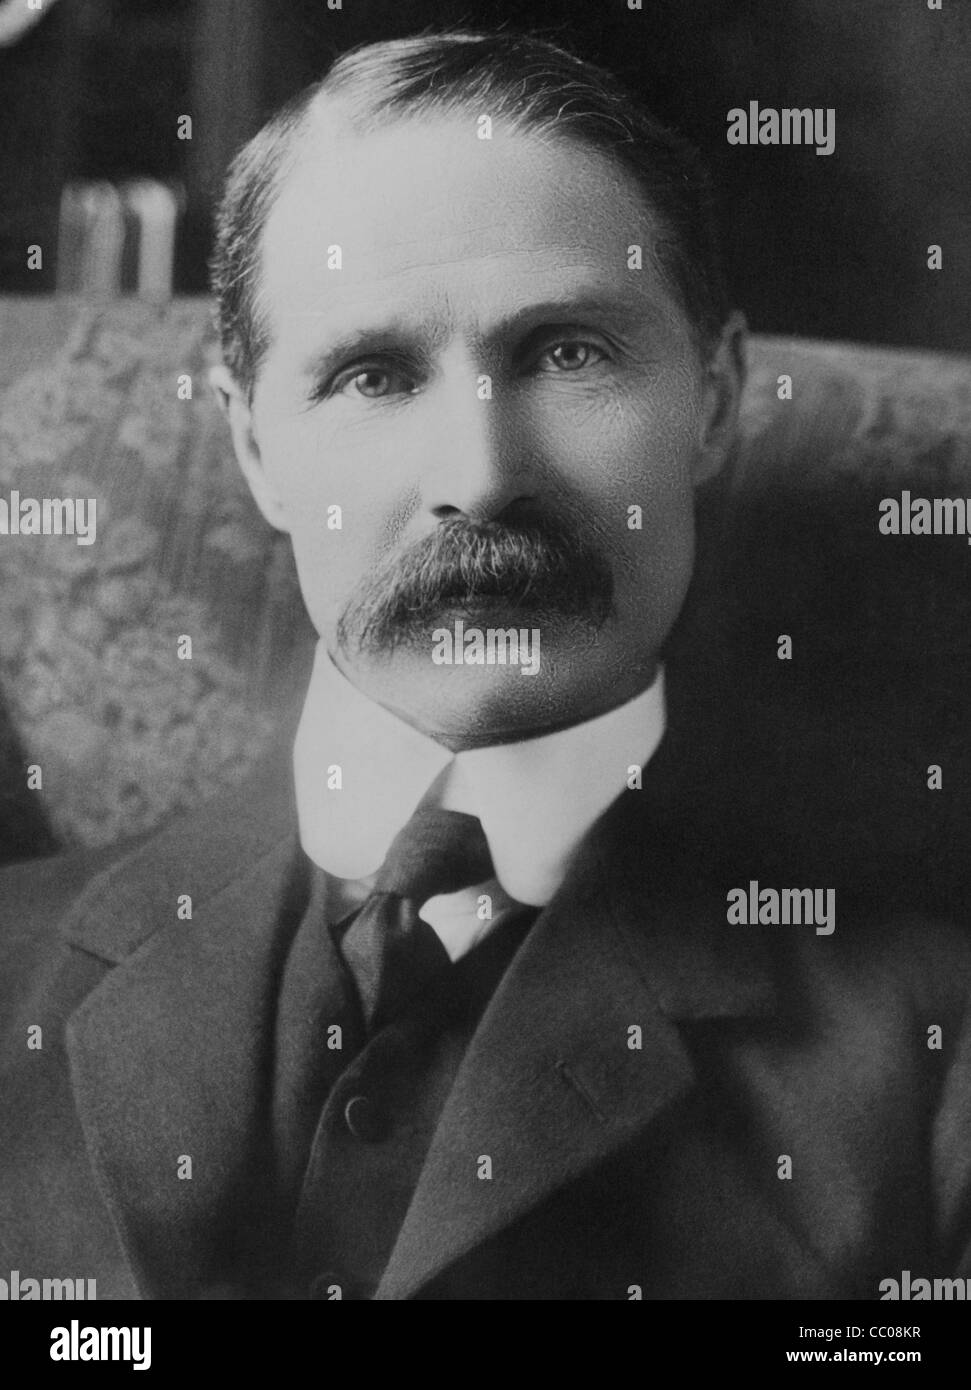 Vintage portrait photo circa 1910s of British politician Andrew Bonar Law (1858 - 1923) - Conservative Prime Minister of the UK from 1922 - 1923. Stock Photo